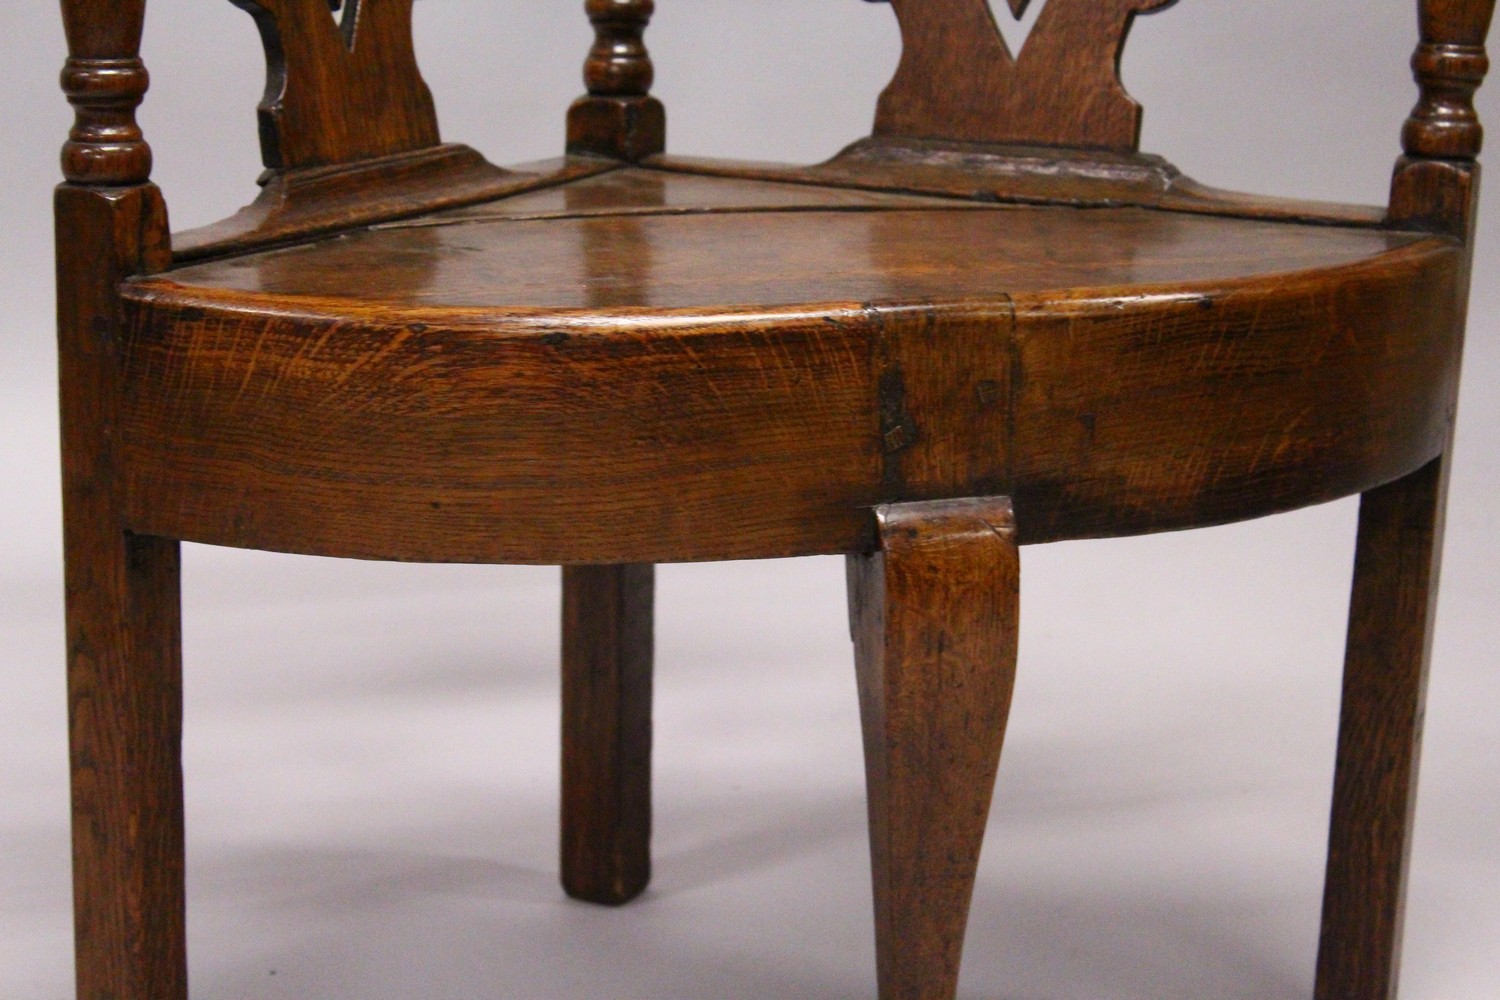 AN 18TH CENTURY OAK CORNER CHAIR, the curving back with pierced splats, solid seat on plain legs and - Image 4 of 12